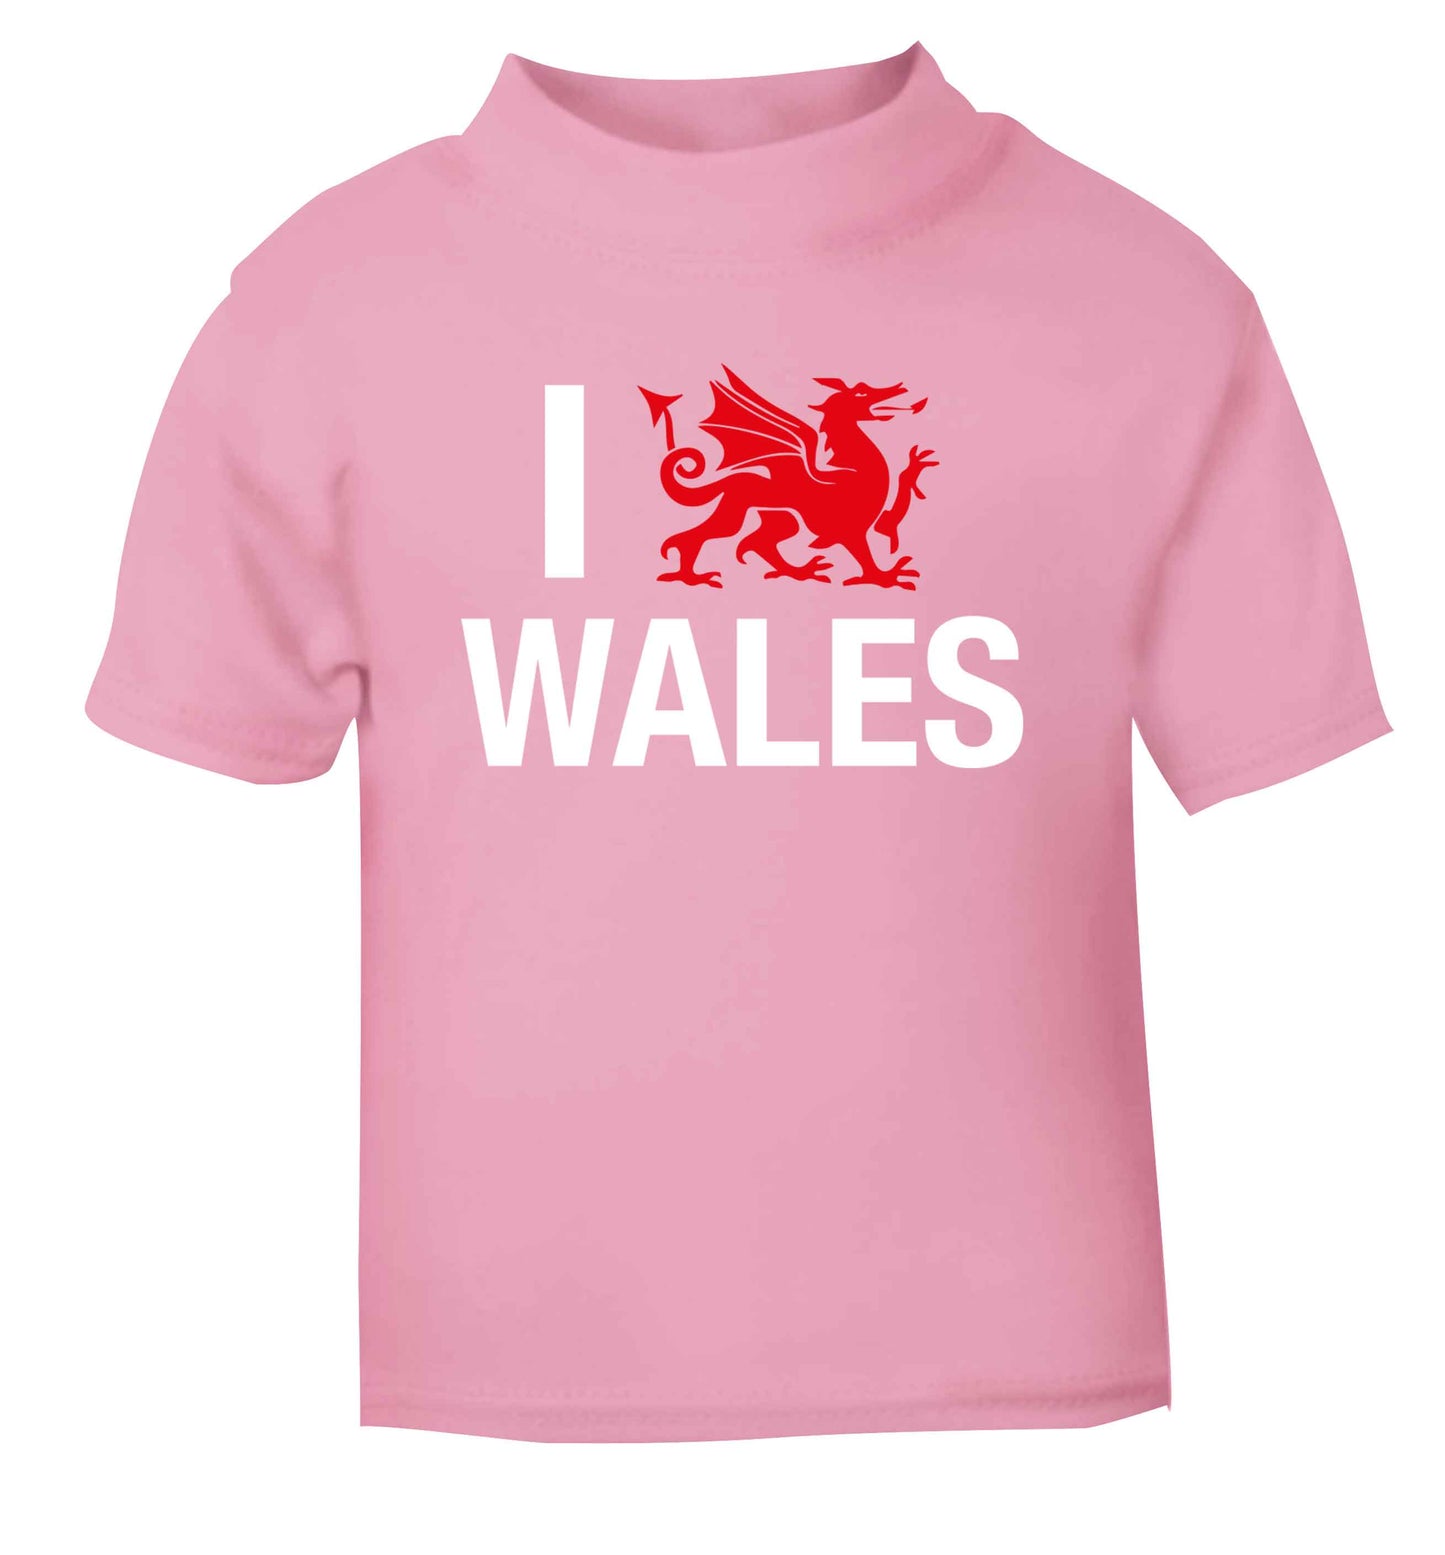 I love Wales light pink Baby Toddler Tshirt 2 Years